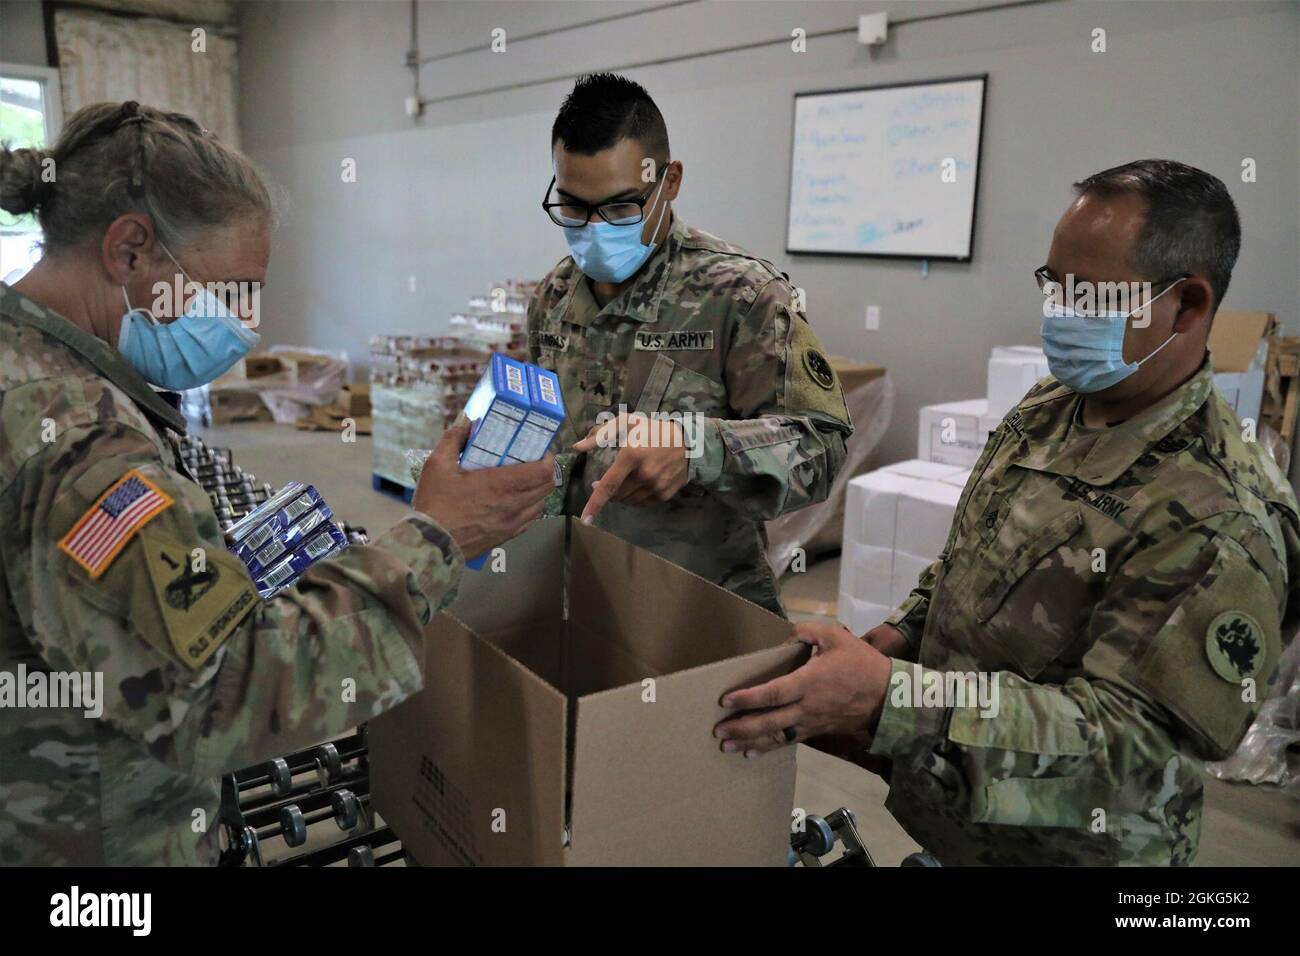 U.S. Army Soldiers assigned to the Mariette-based 78th Troop Command, Georgia Army National Guard pack a box of food April 14, 2021, at America’s Second Harvest of Coastal Georgia food bank in Savannah, Georgia. The Georgia Guardsmen all reside in the Savannah area and were activated in response to the COVID-19 pandemic. Stock Photo